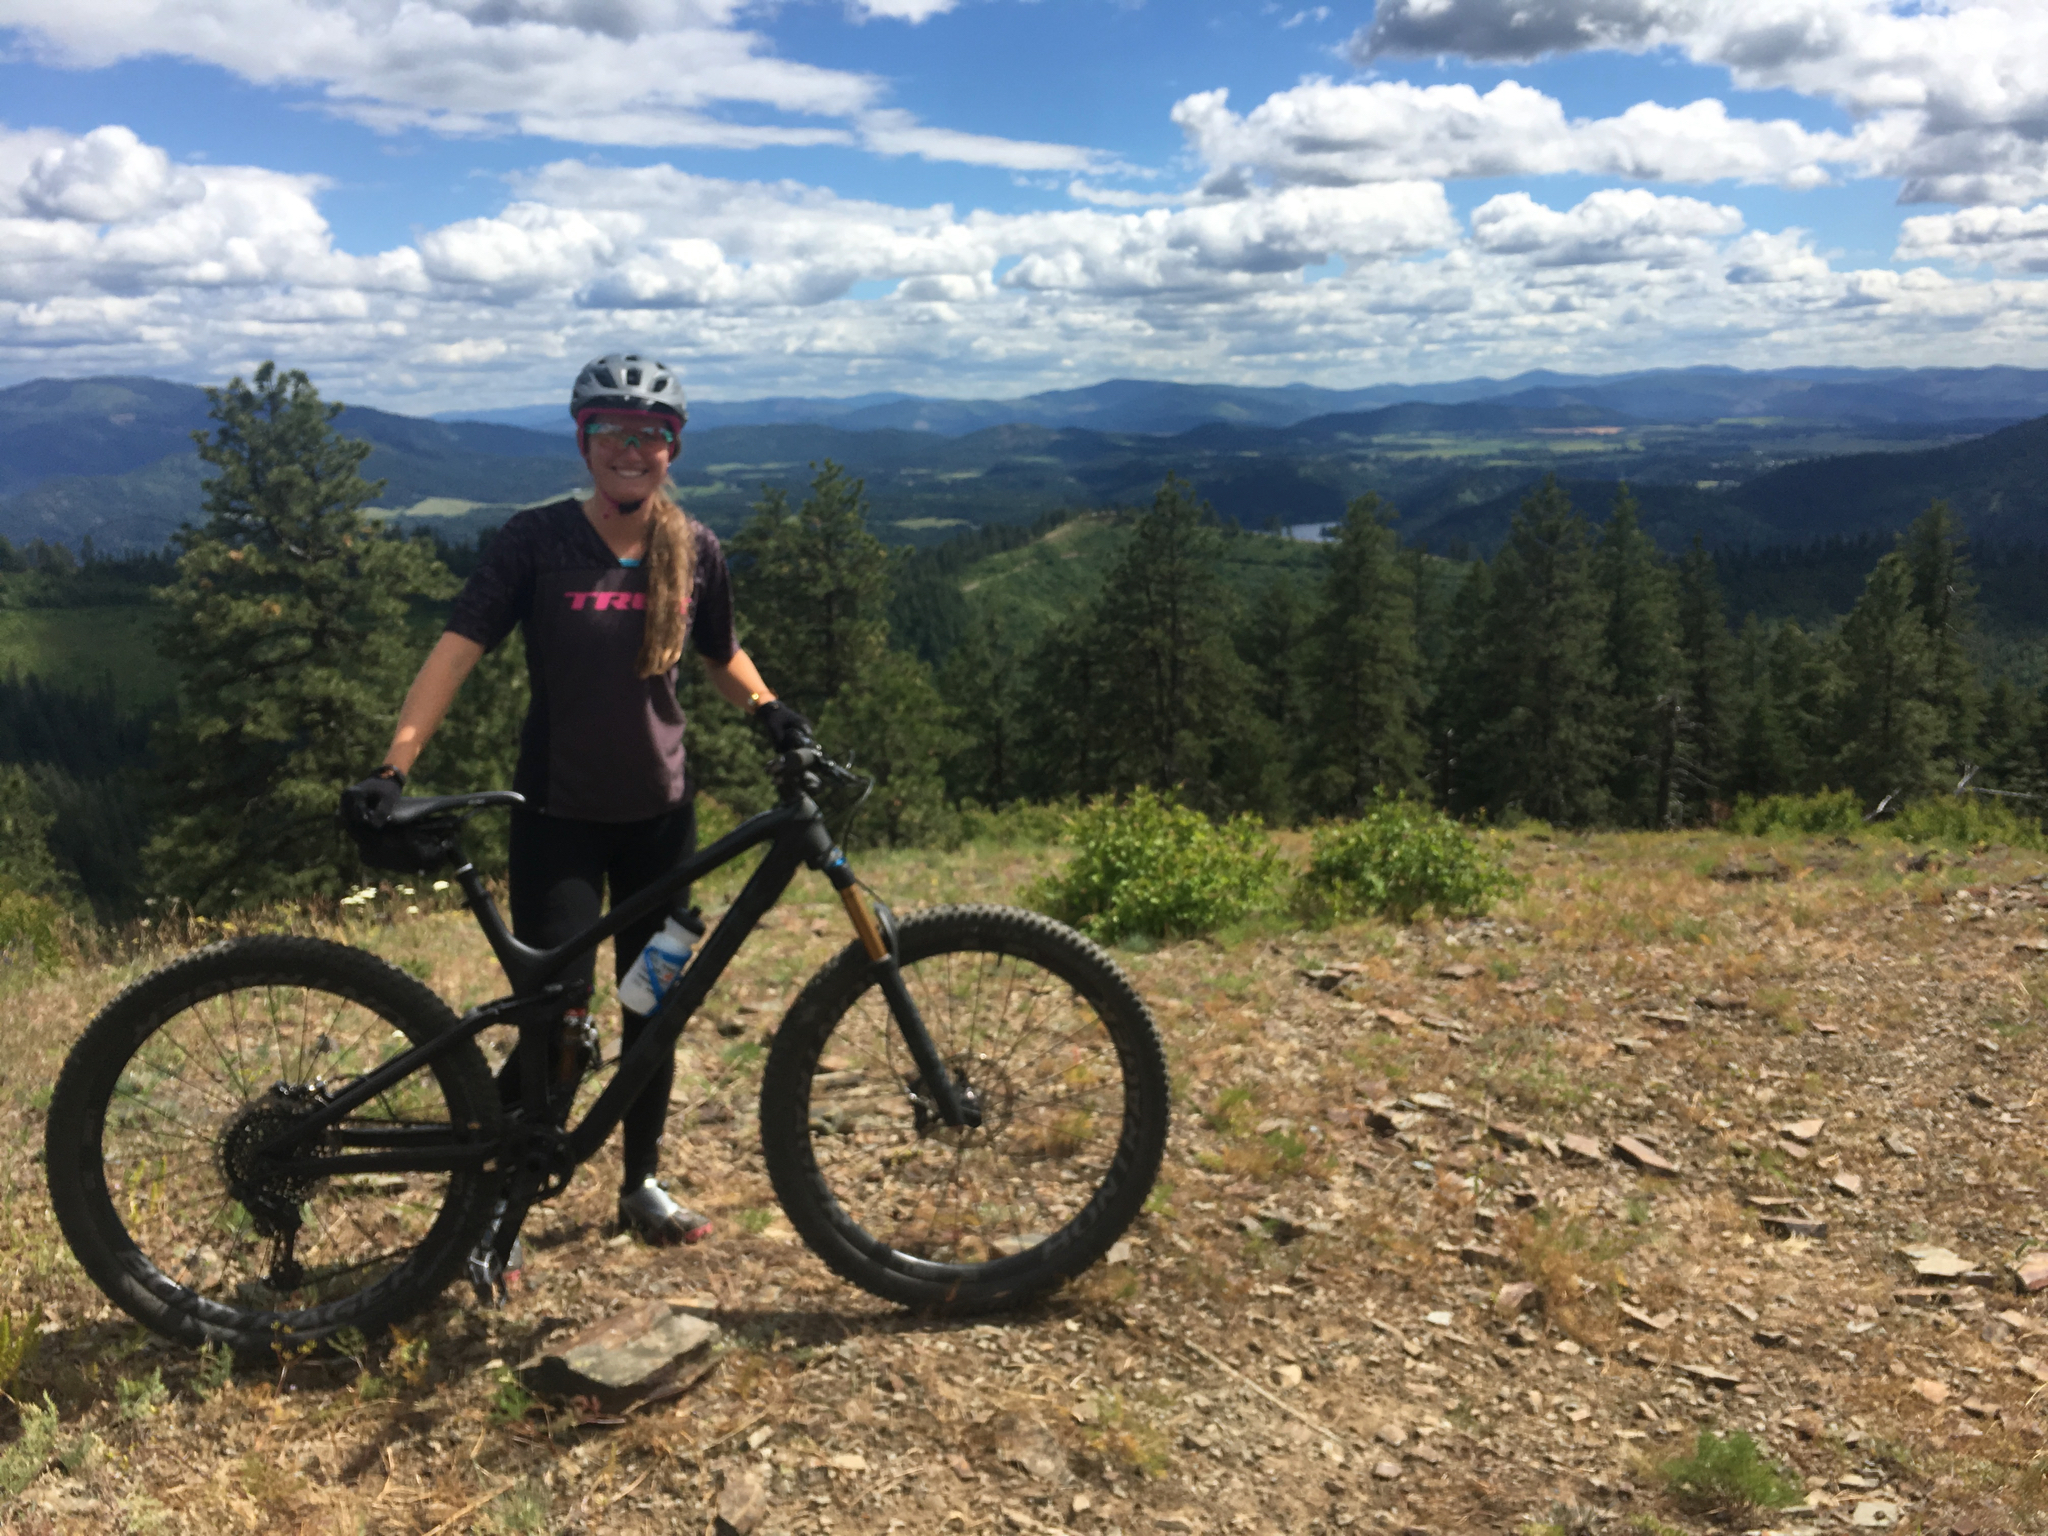 Woman posing with mountain bike on a hlltop.